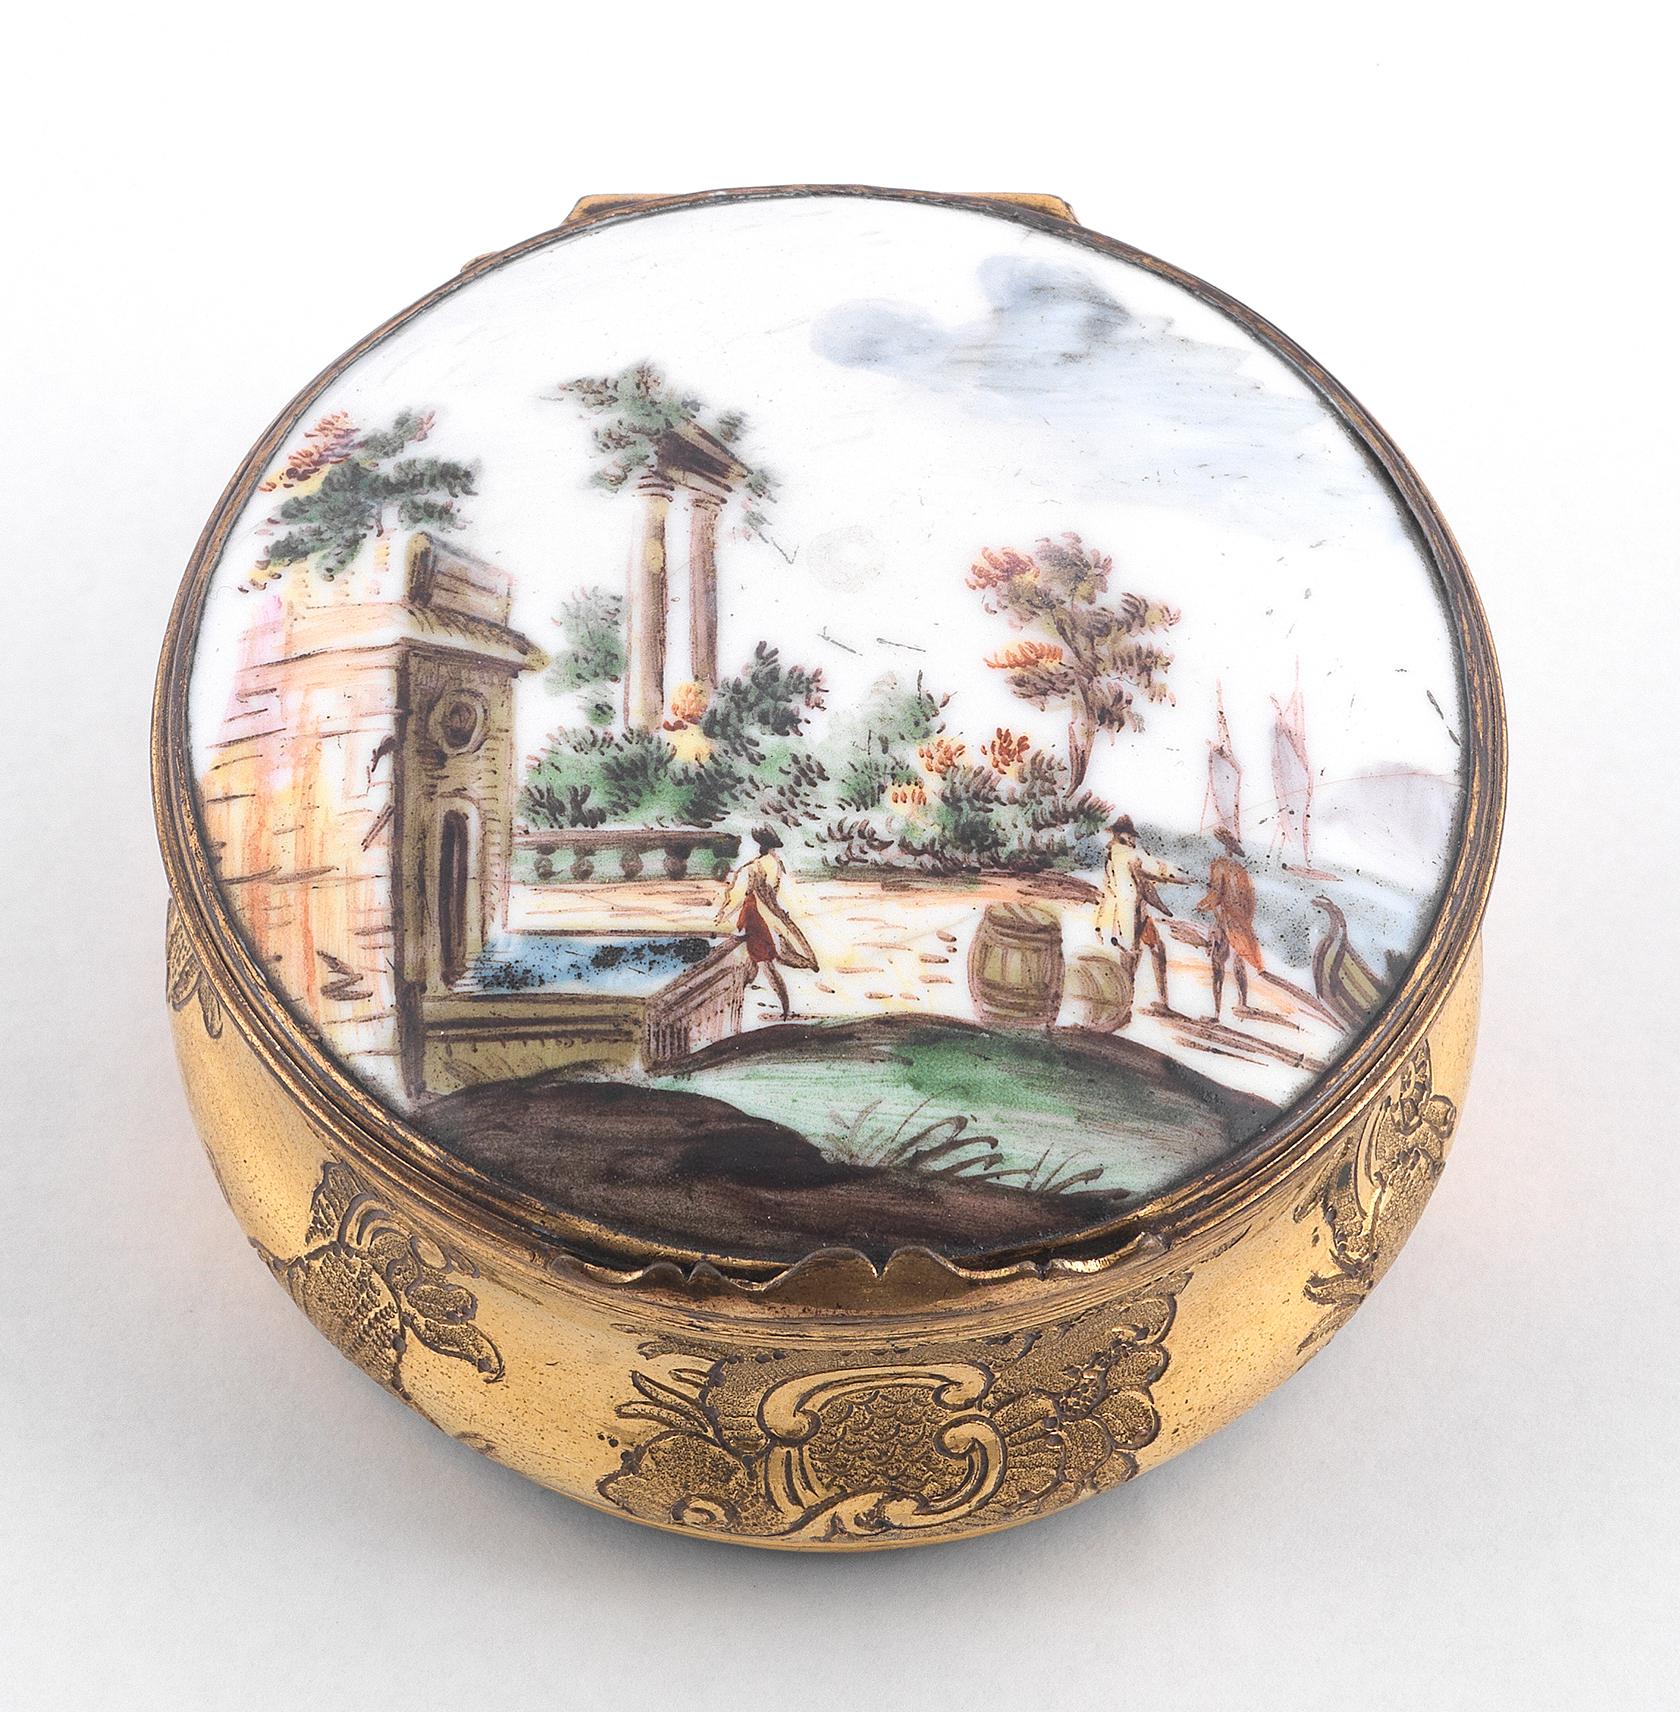 enamelled or lacquered metalware popular in the 18th century